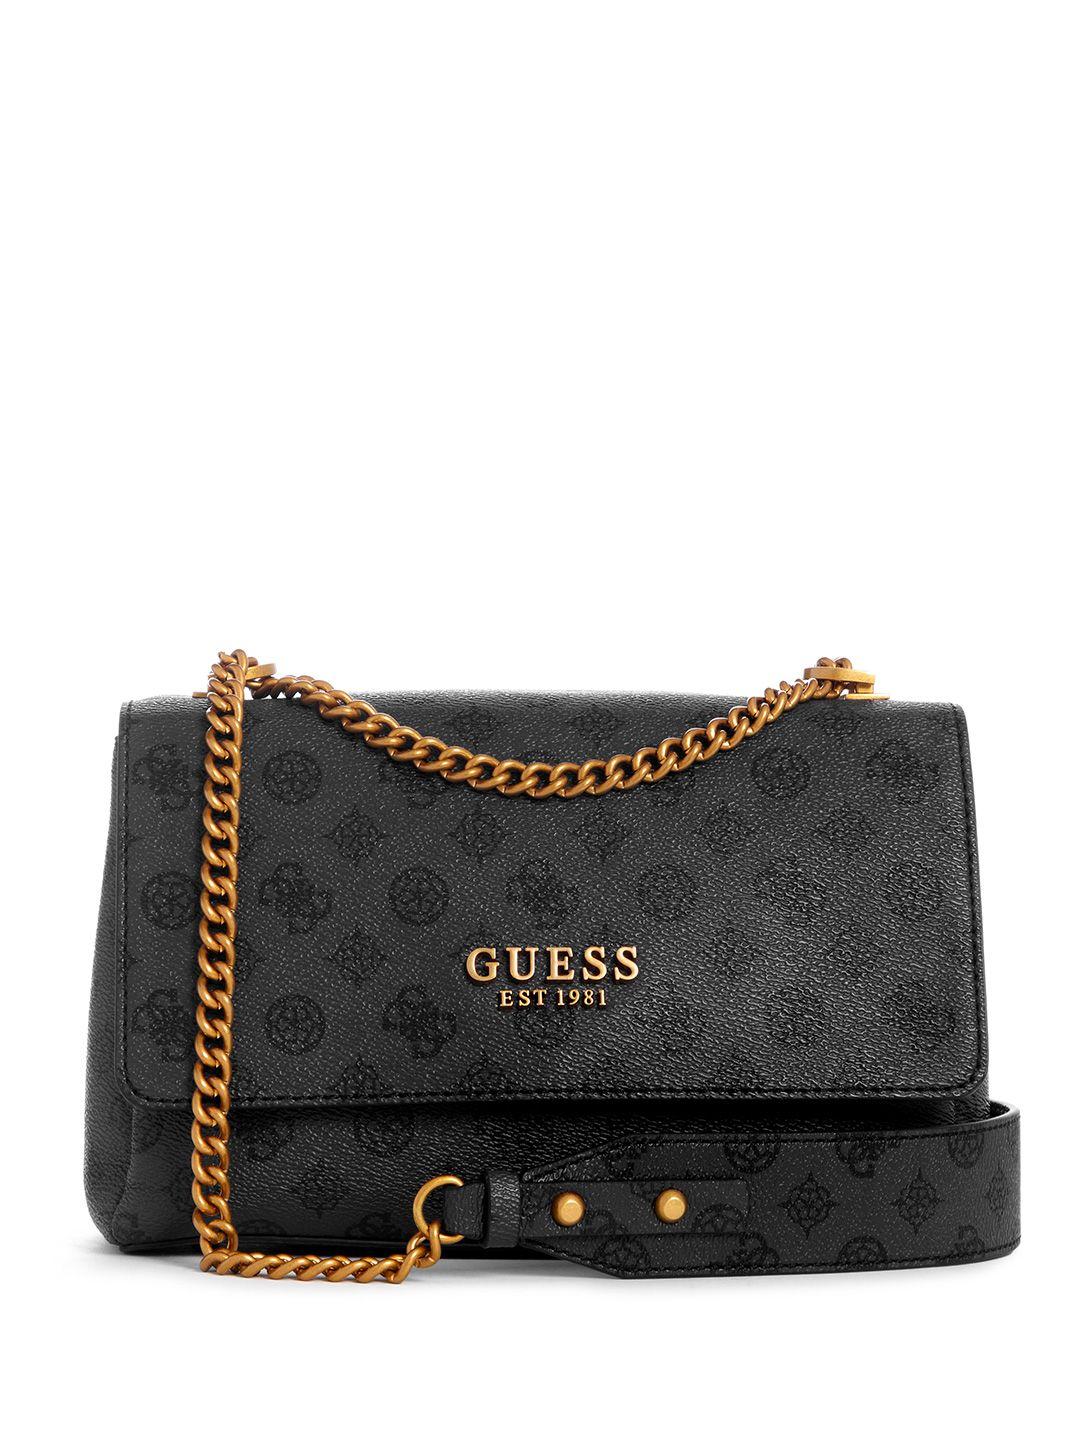 guess brand logo printed structured sling bag